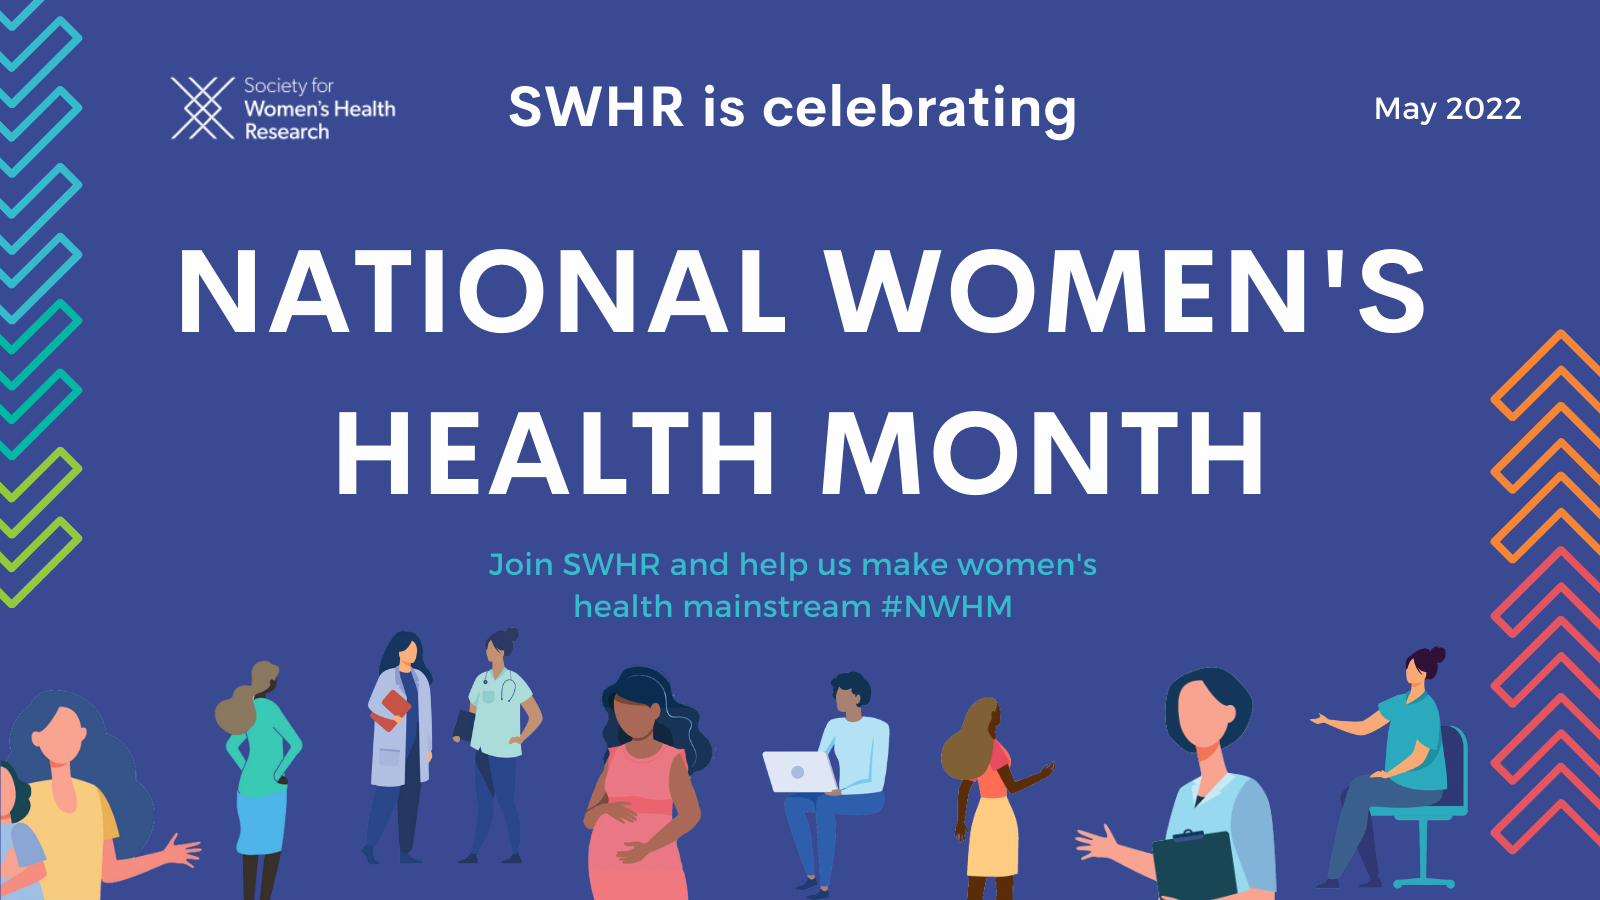 Moving Women’s Health Forward Through Research & Advocacy SWHR